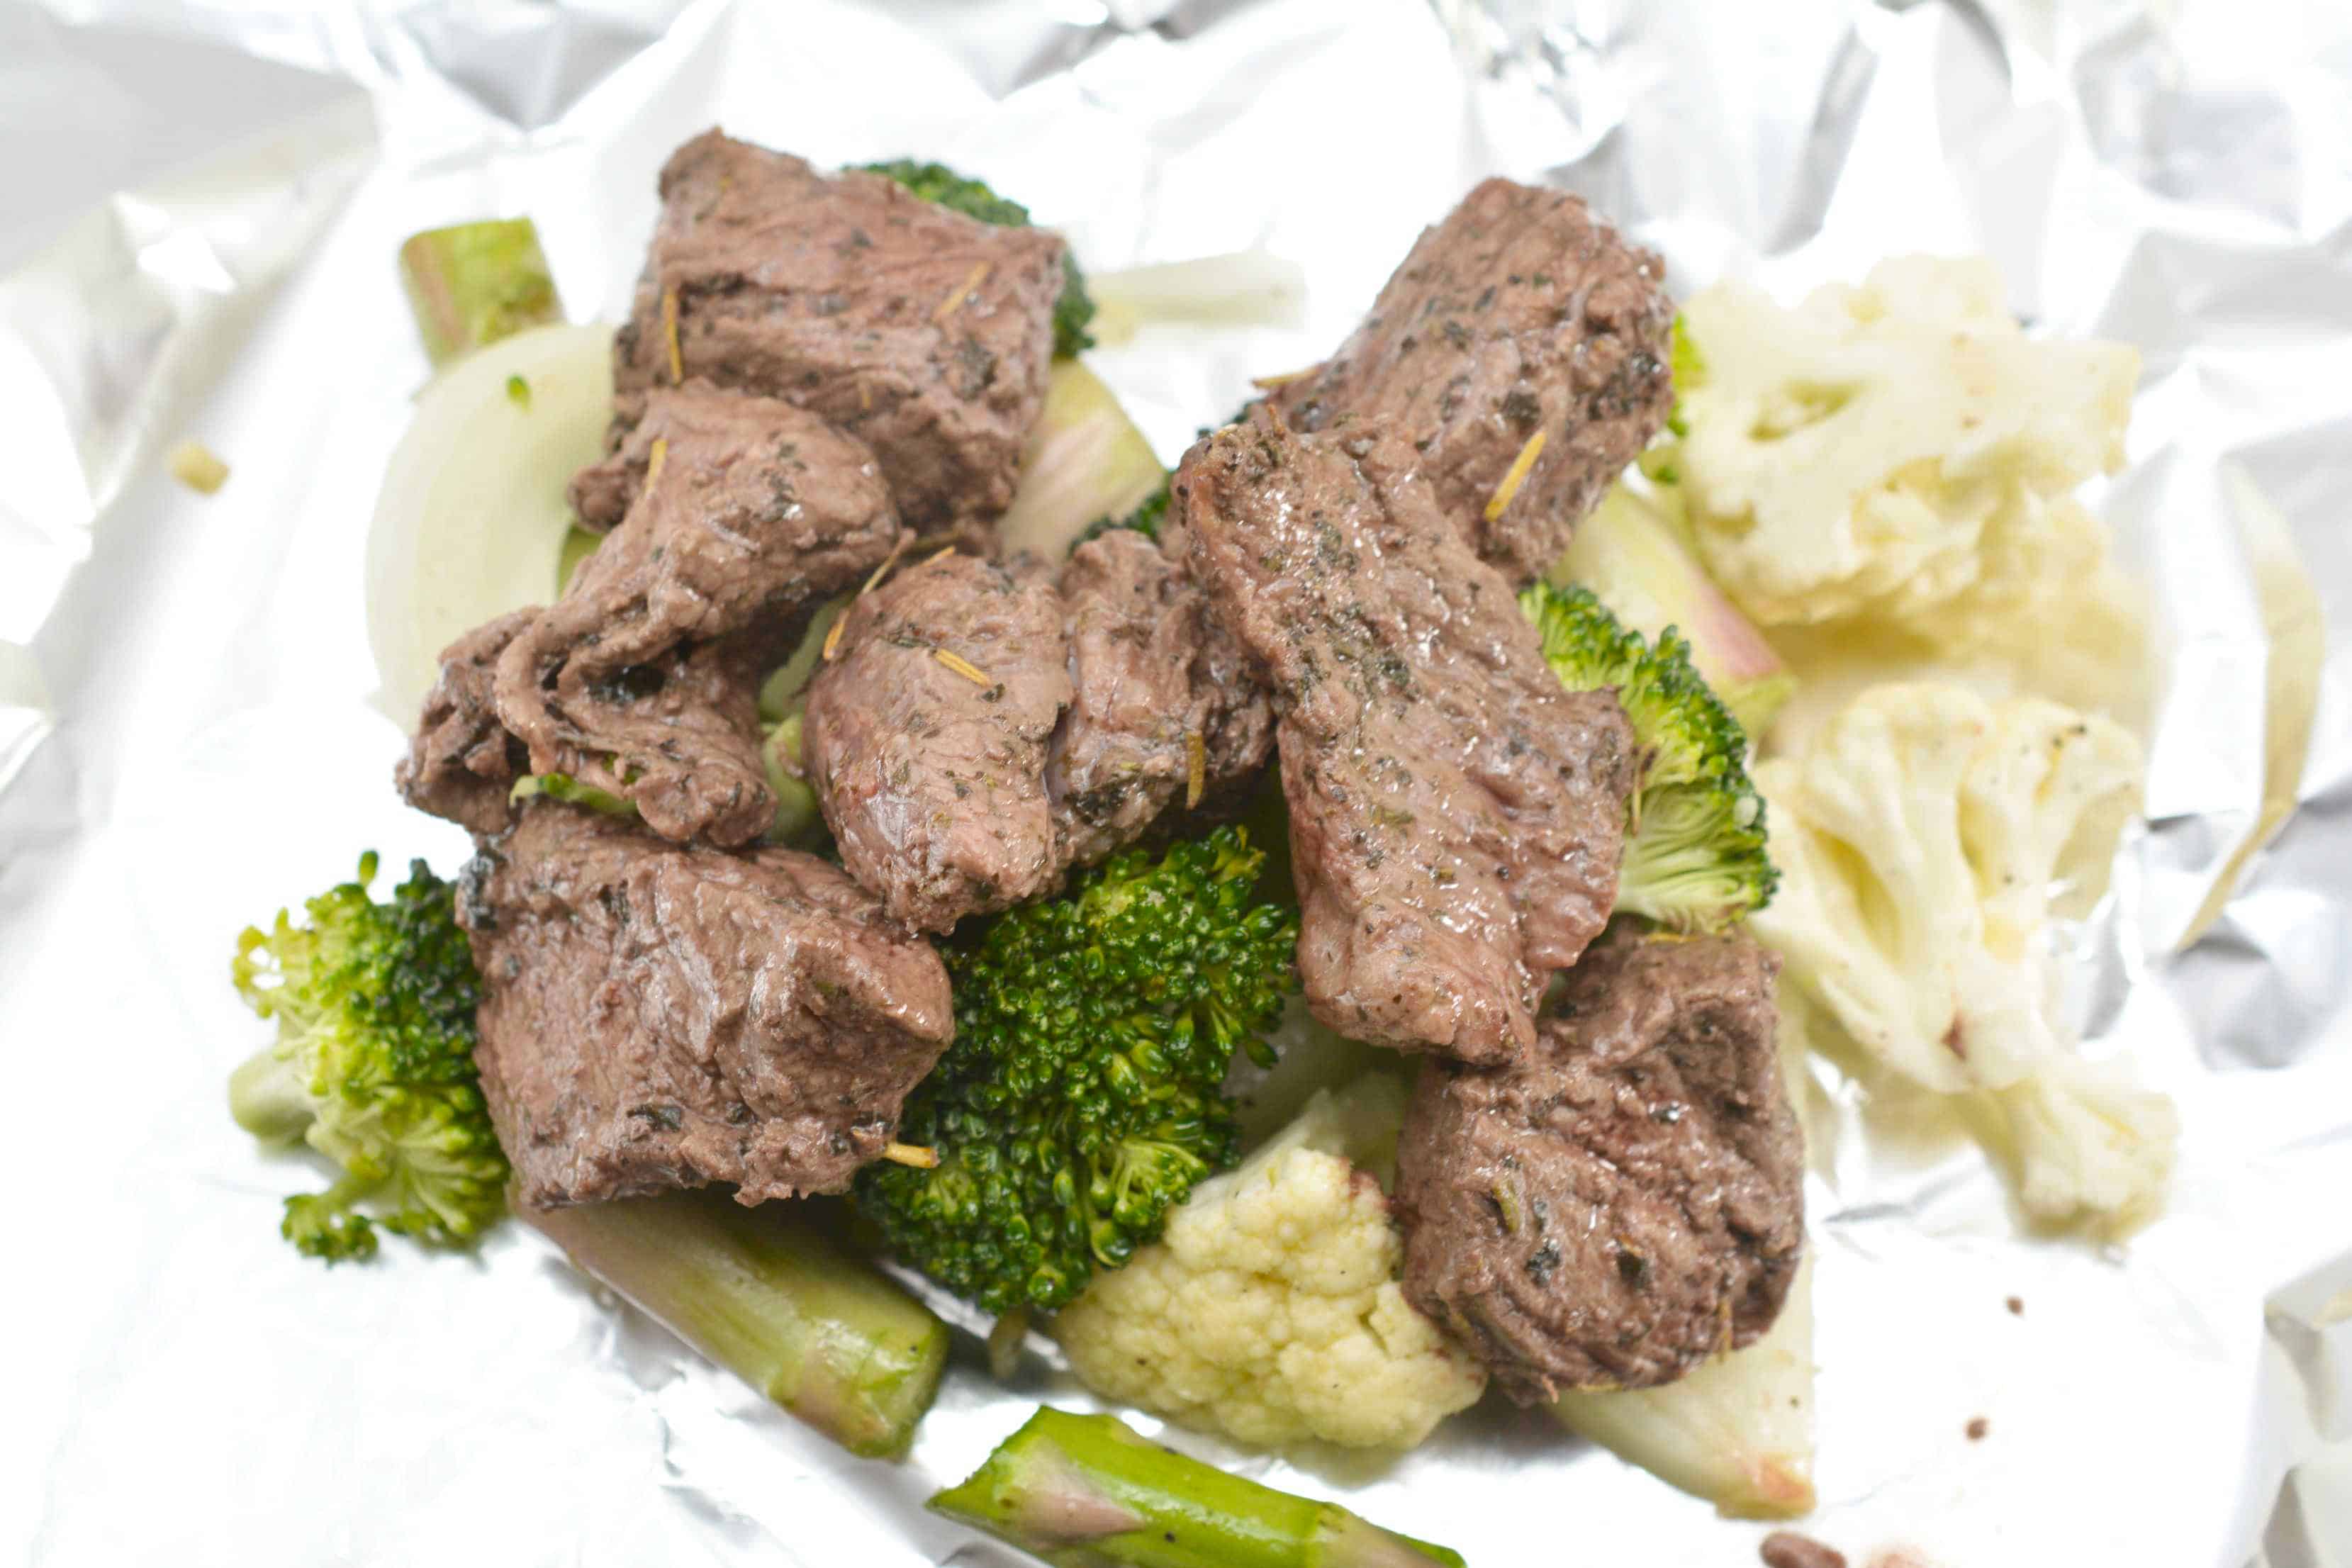 cooked steak and vegetables in foil